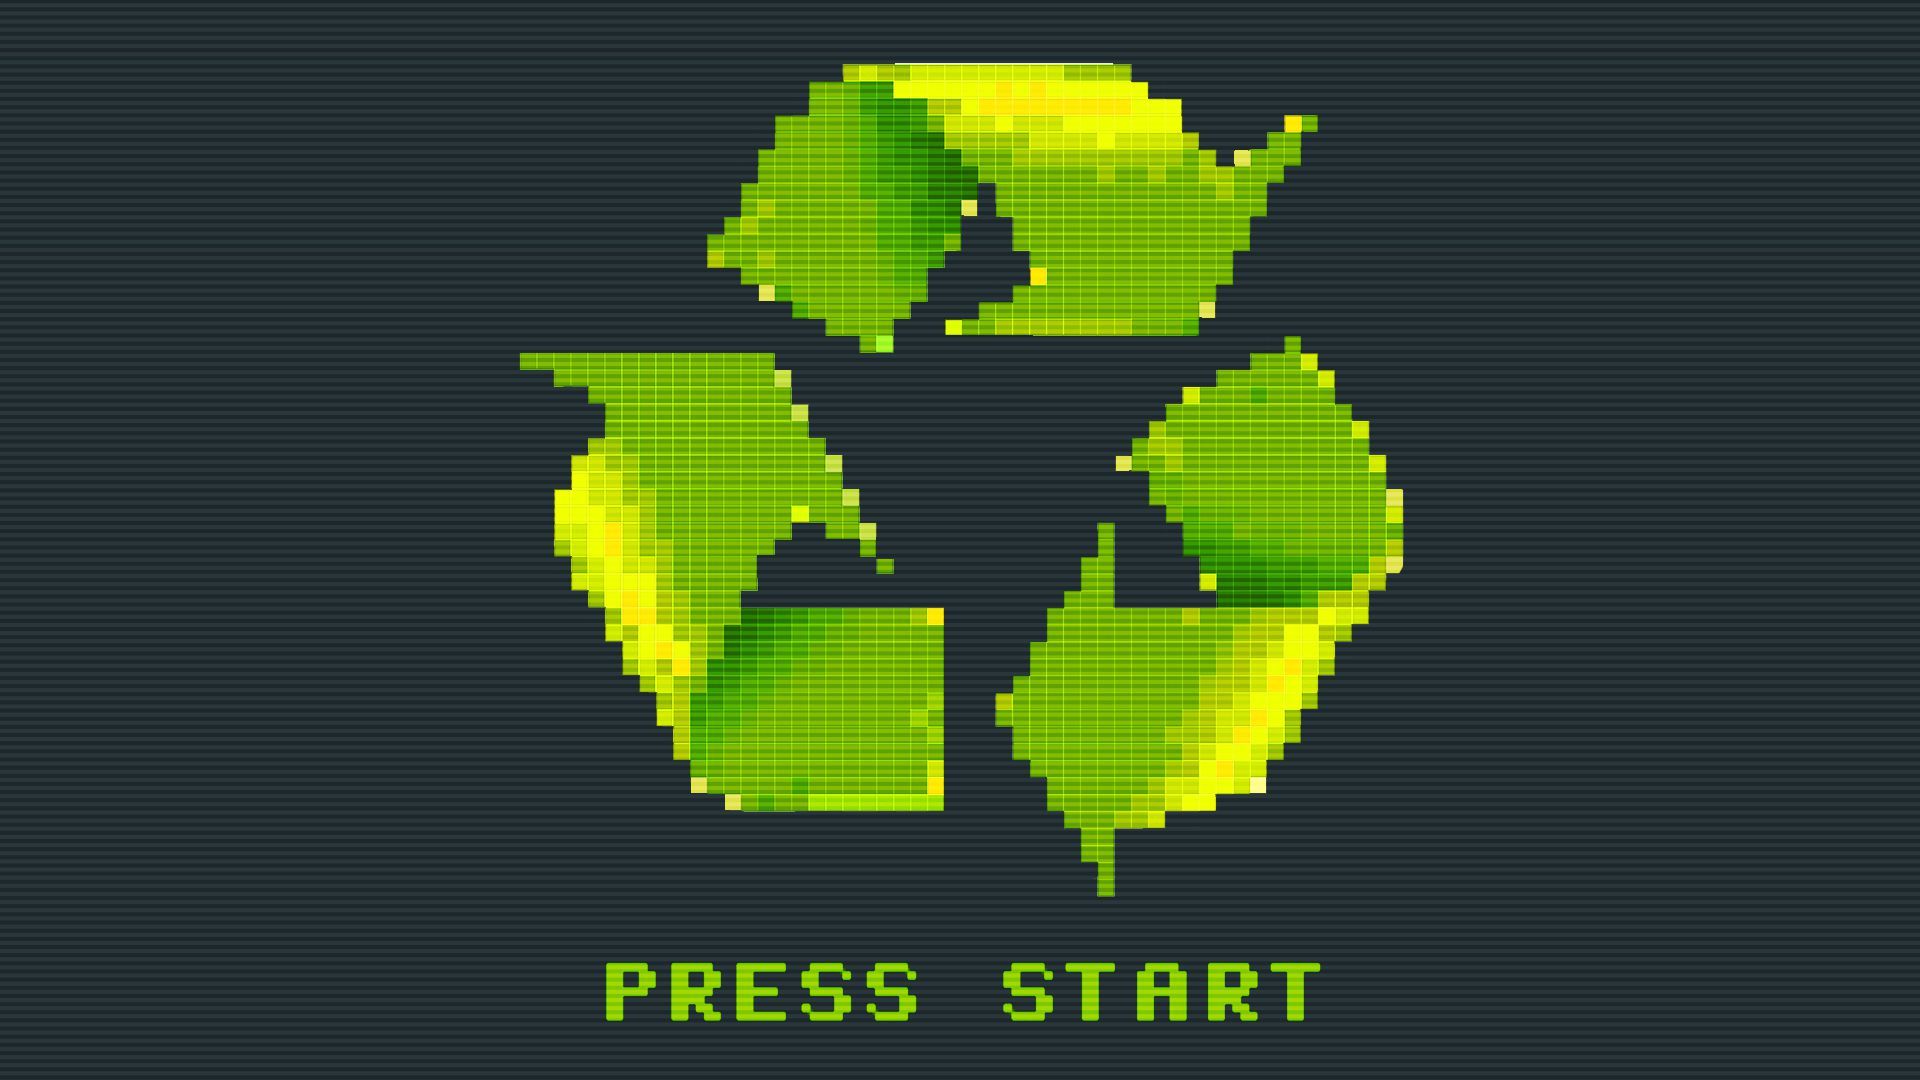 Illustration of a video game start menu with a pixelated recycle icon